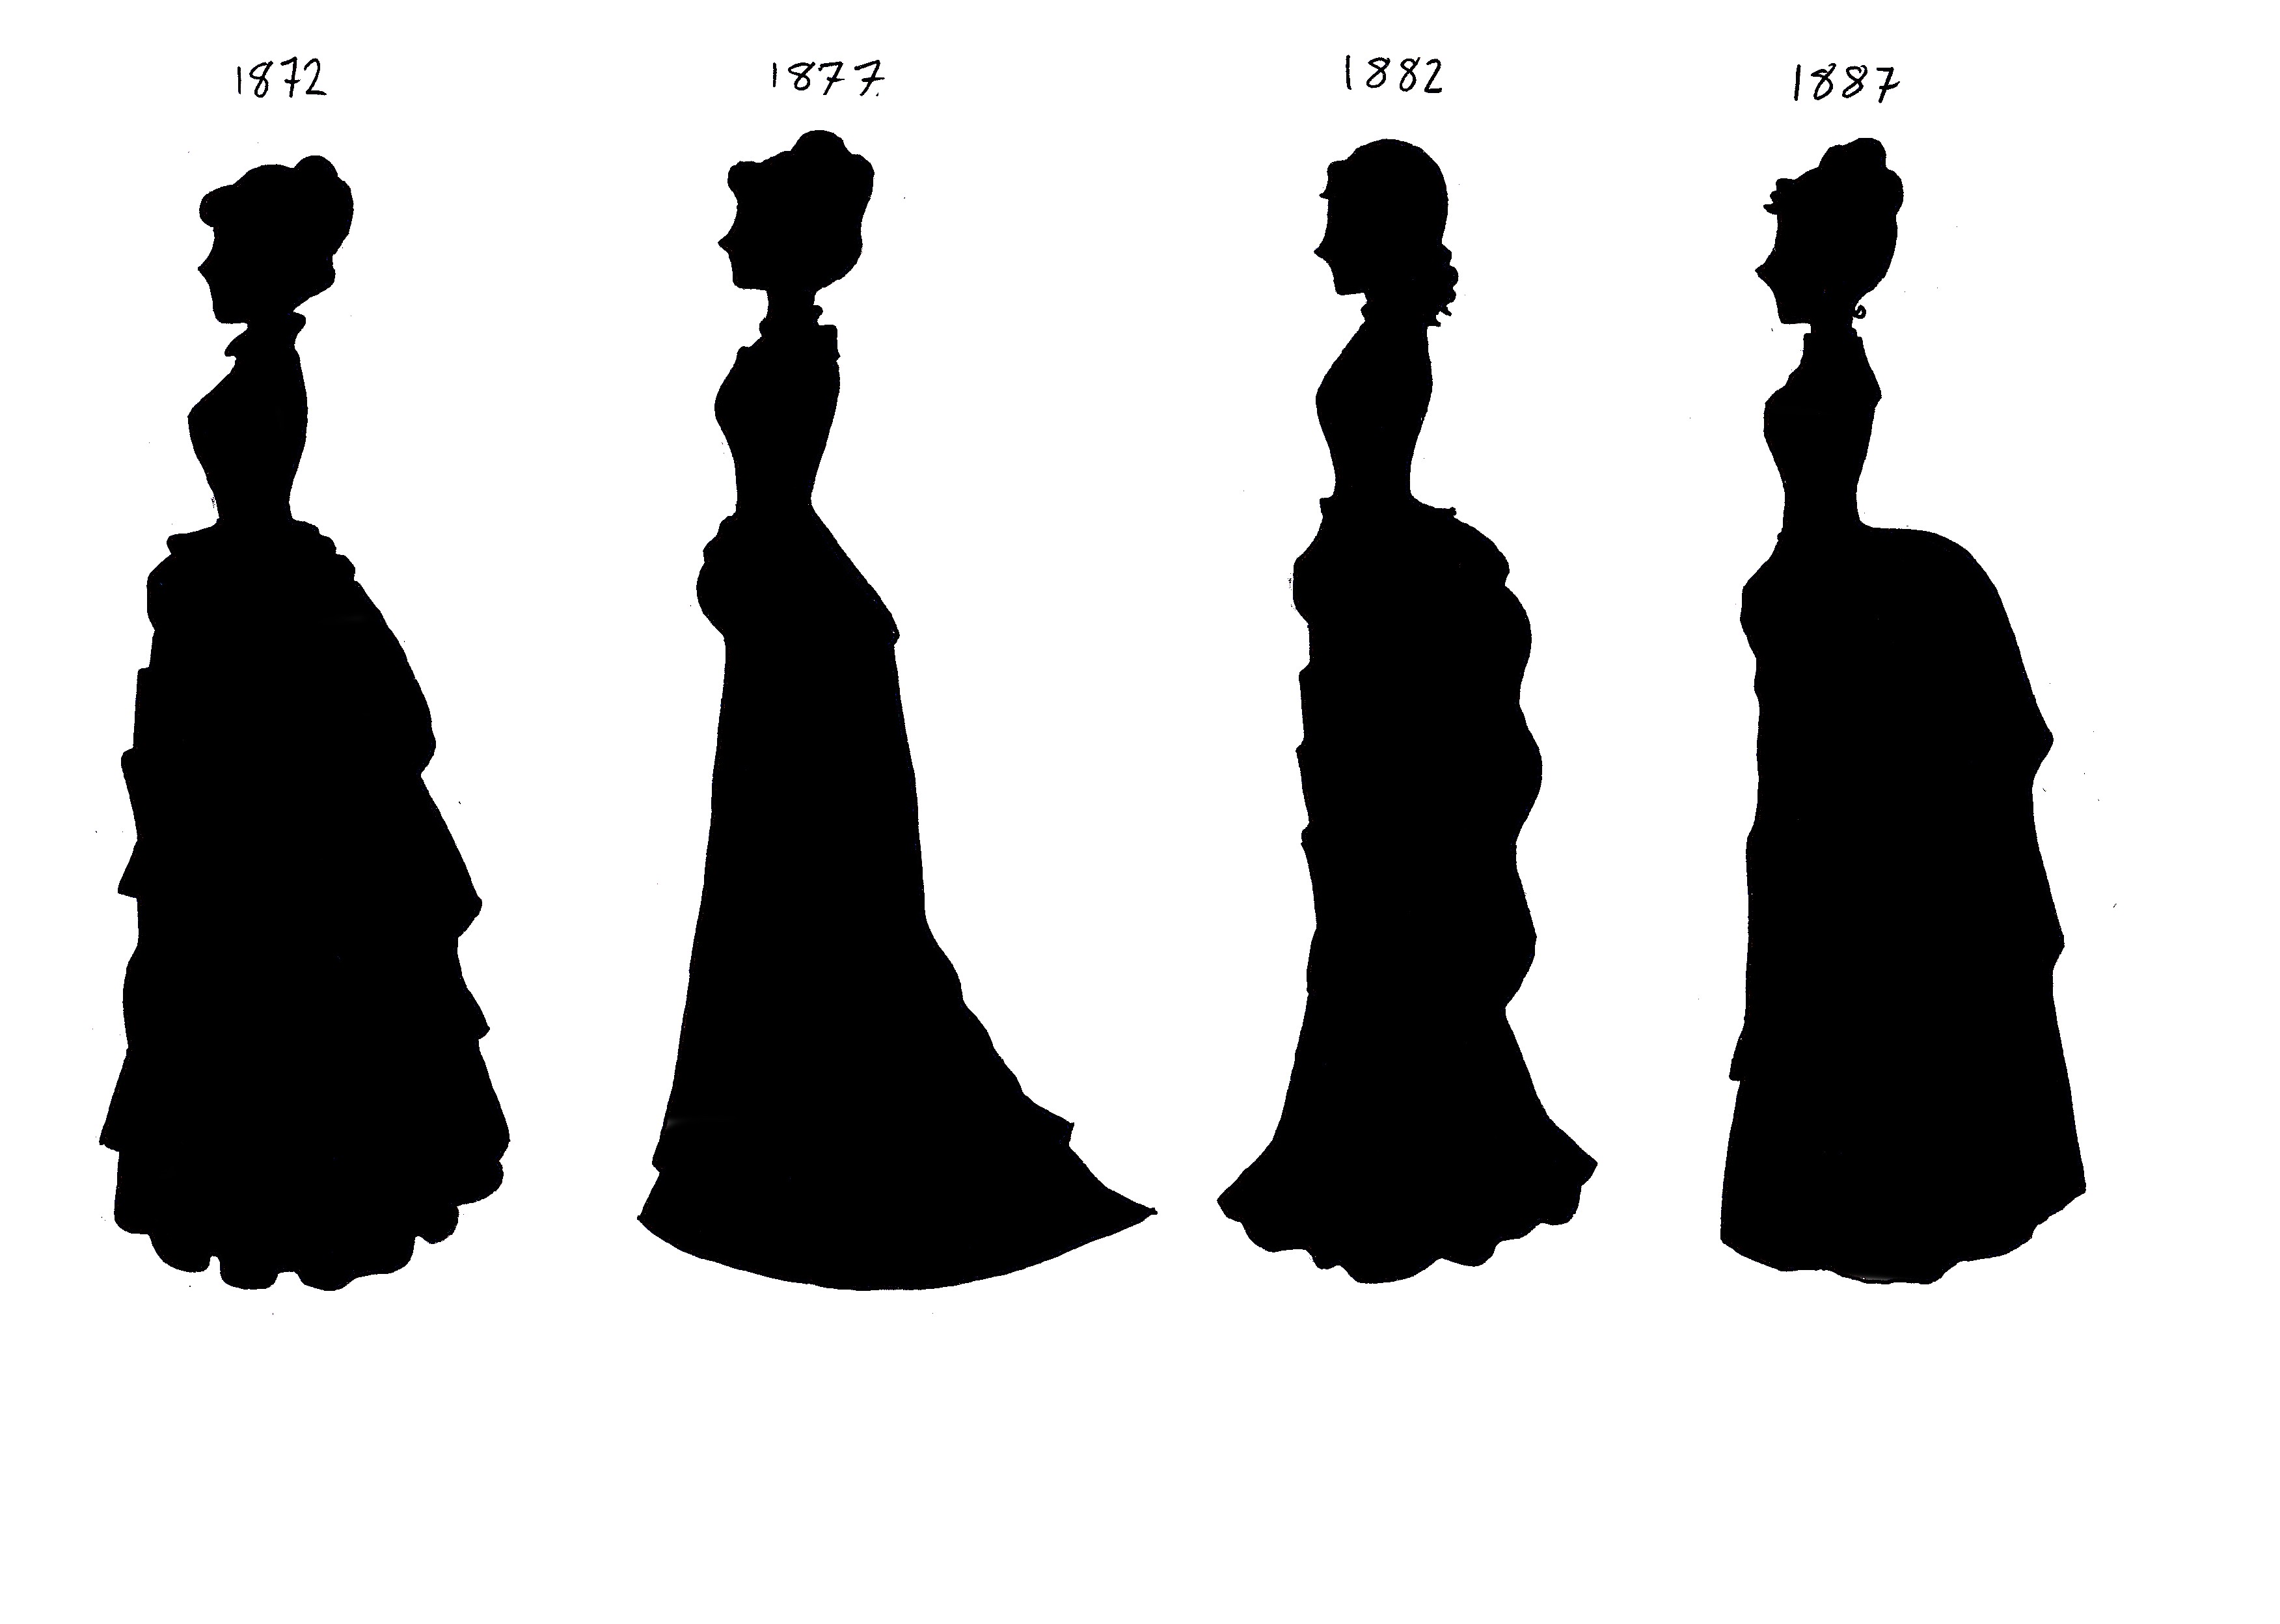 Victorian Silhouettes-1872-87 - PaperDemon